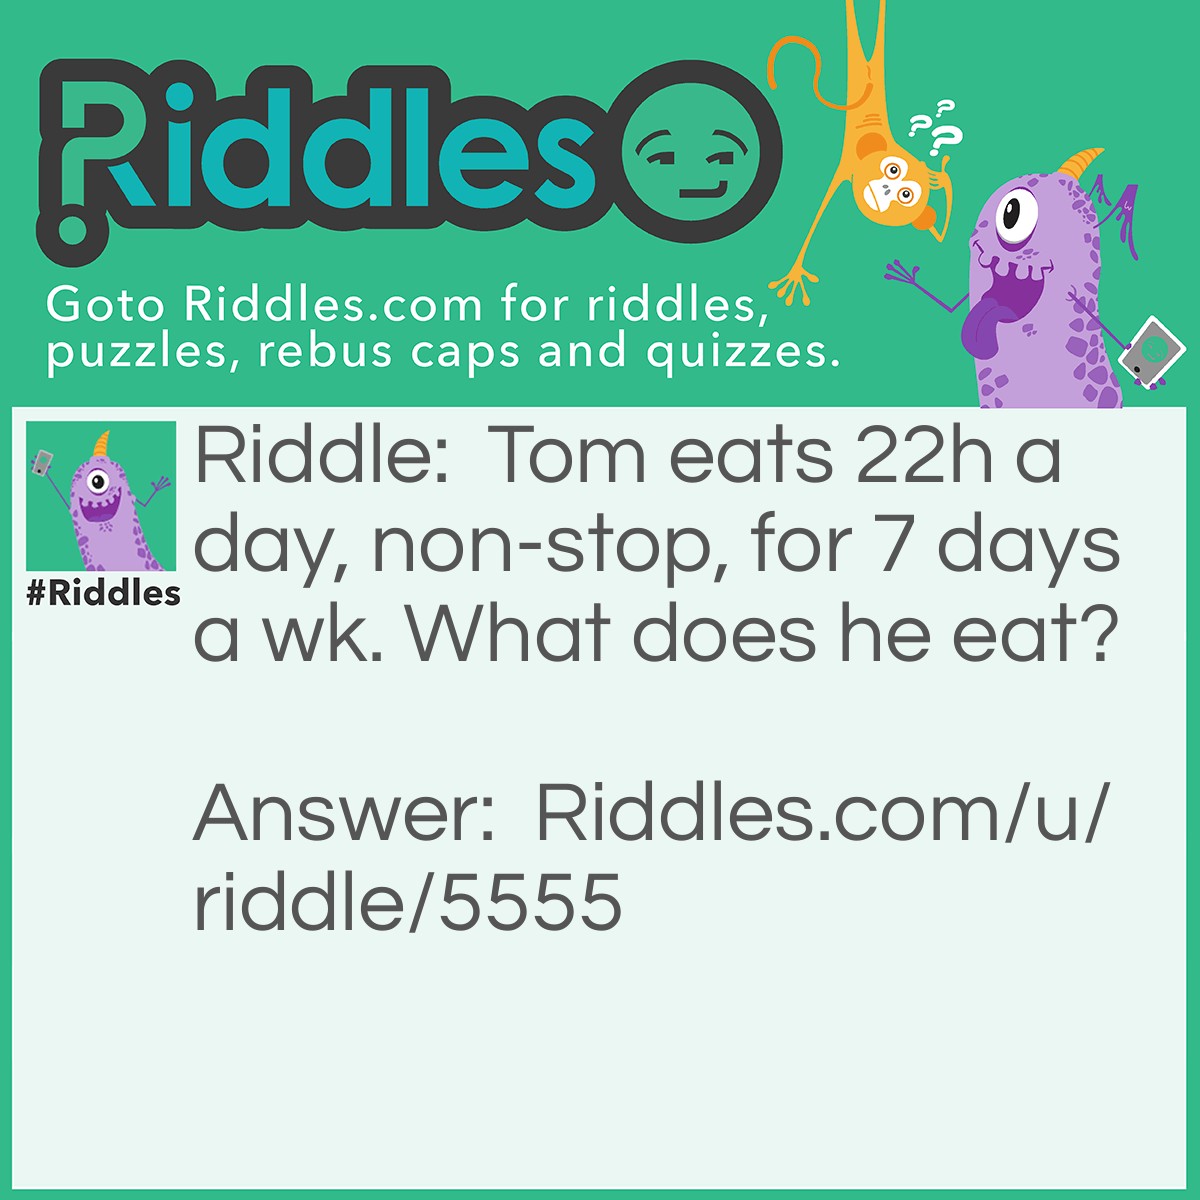 Riddle: Tom eats 22h a day, non-stop, for 7 days a wk. What does he eat? Answer: He eats 22/7, so he eats π.